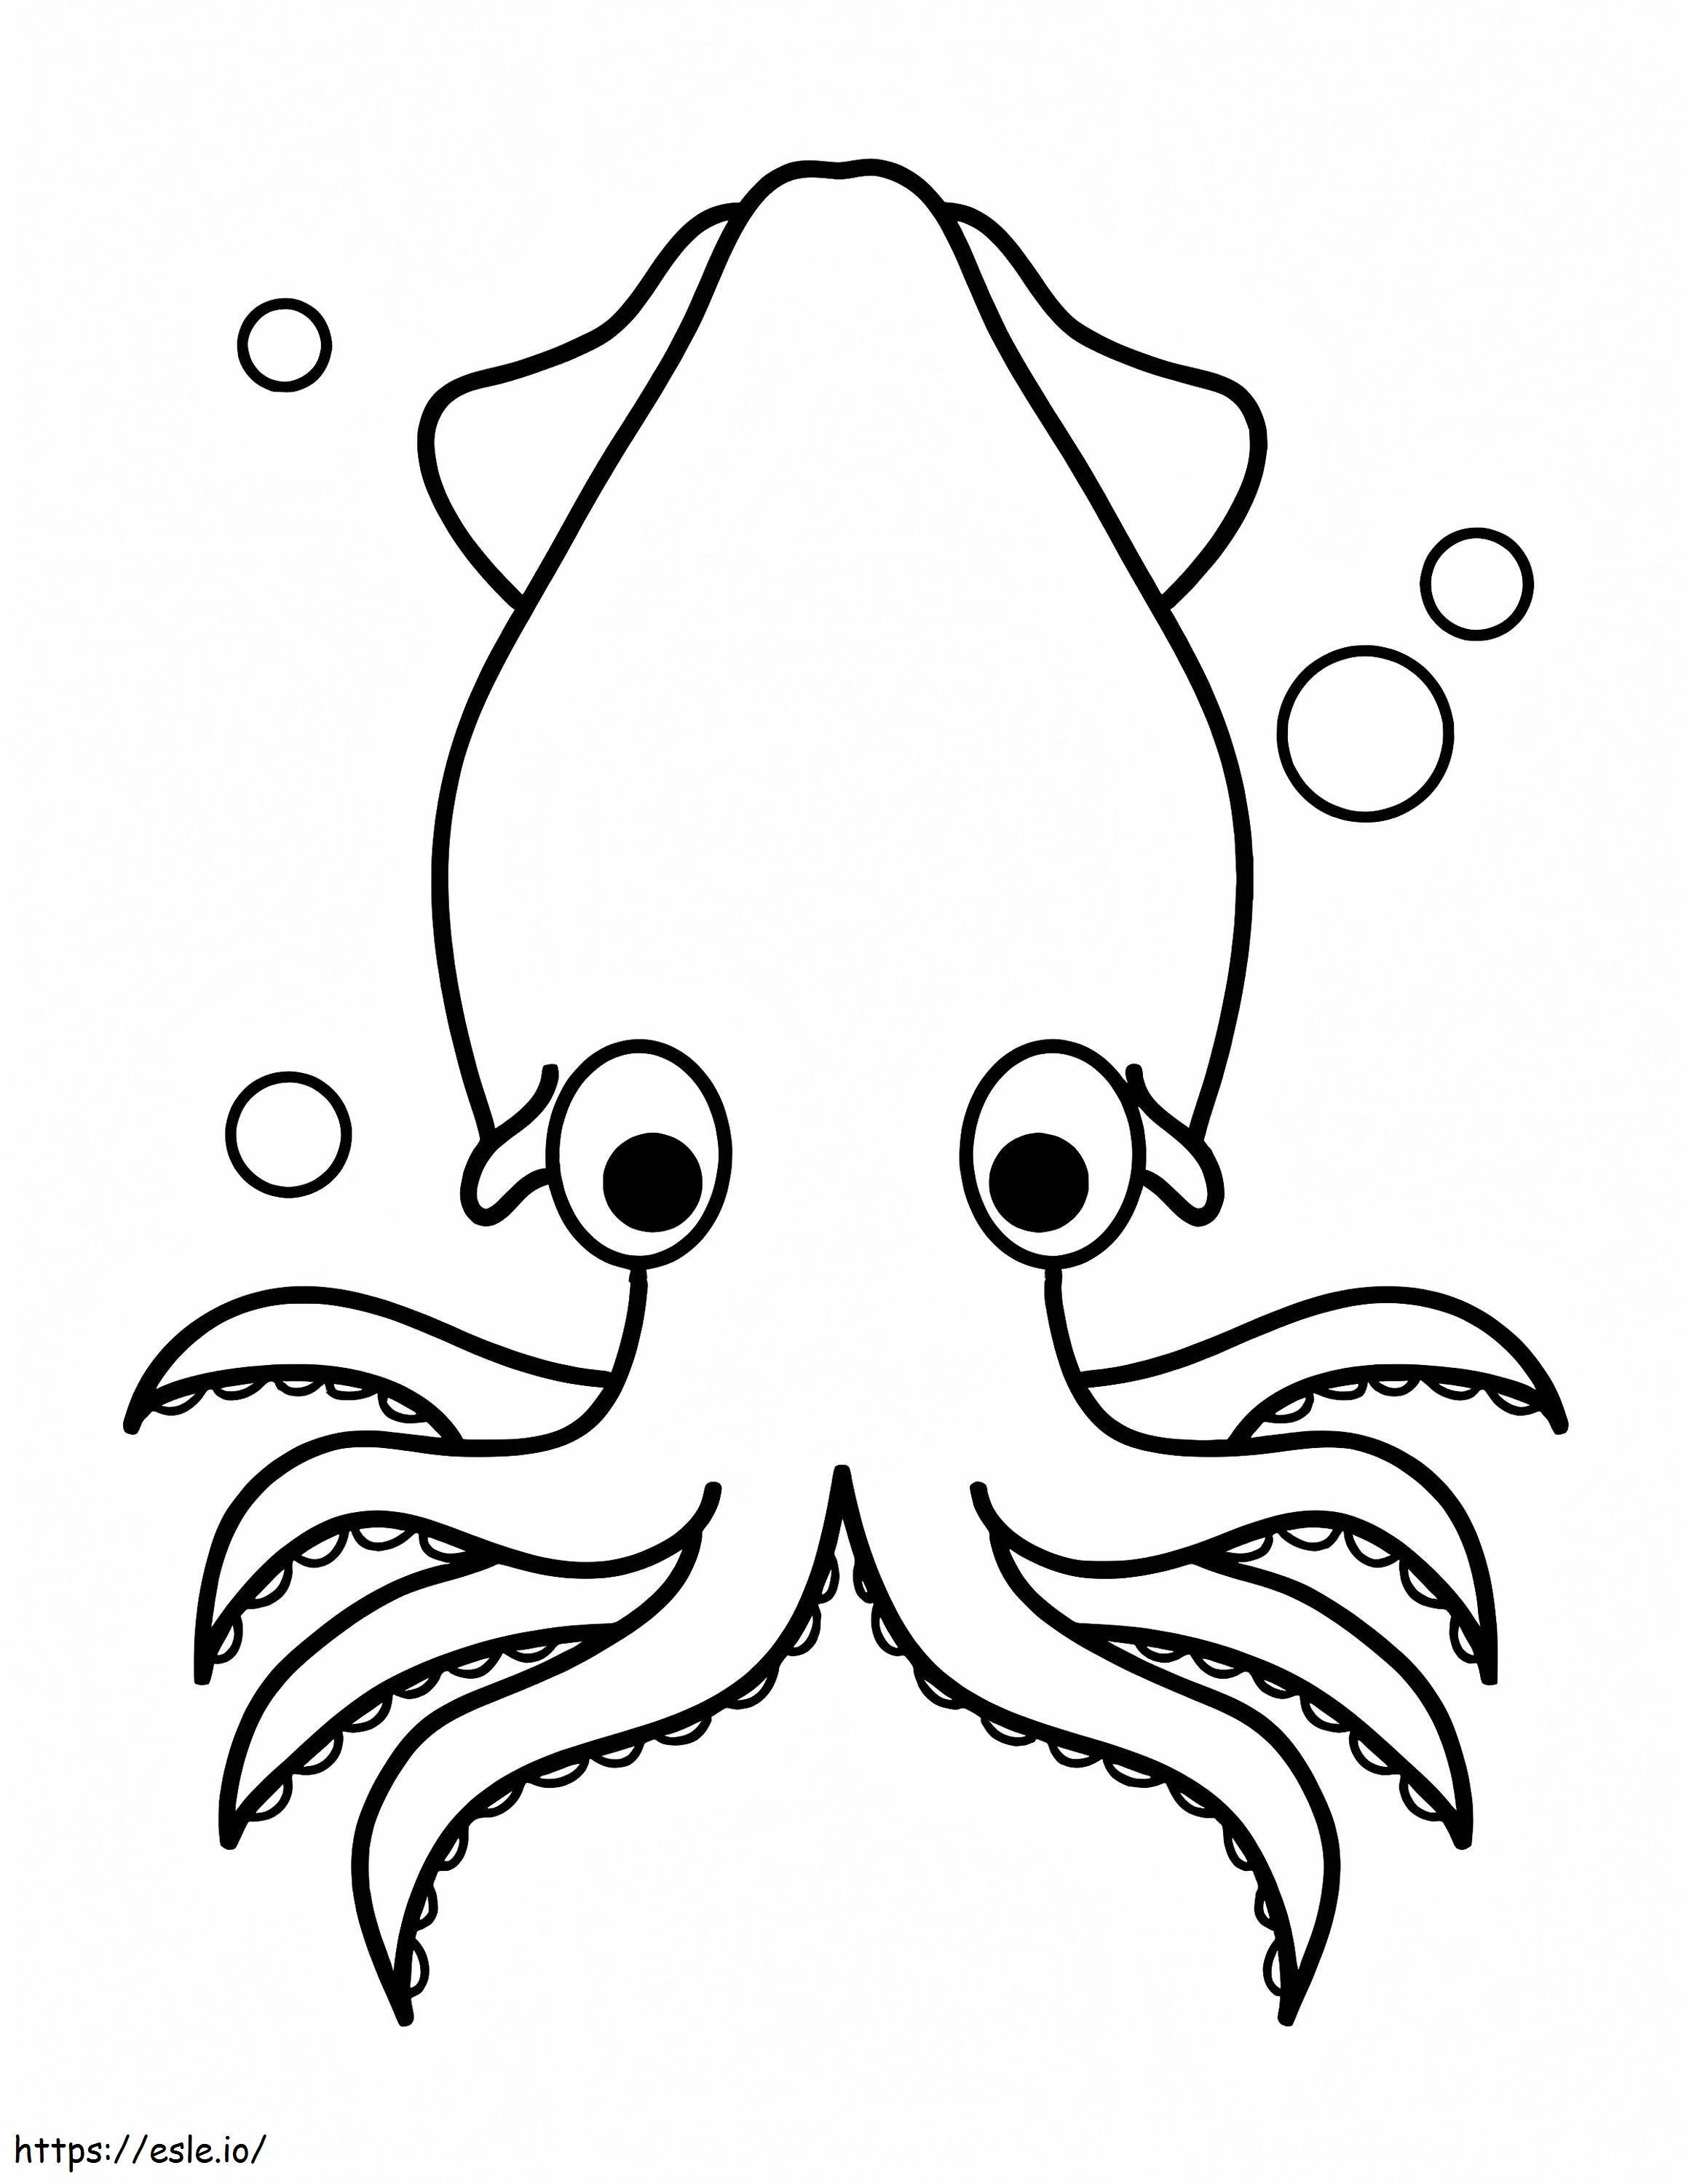 Basic Squid coloring page